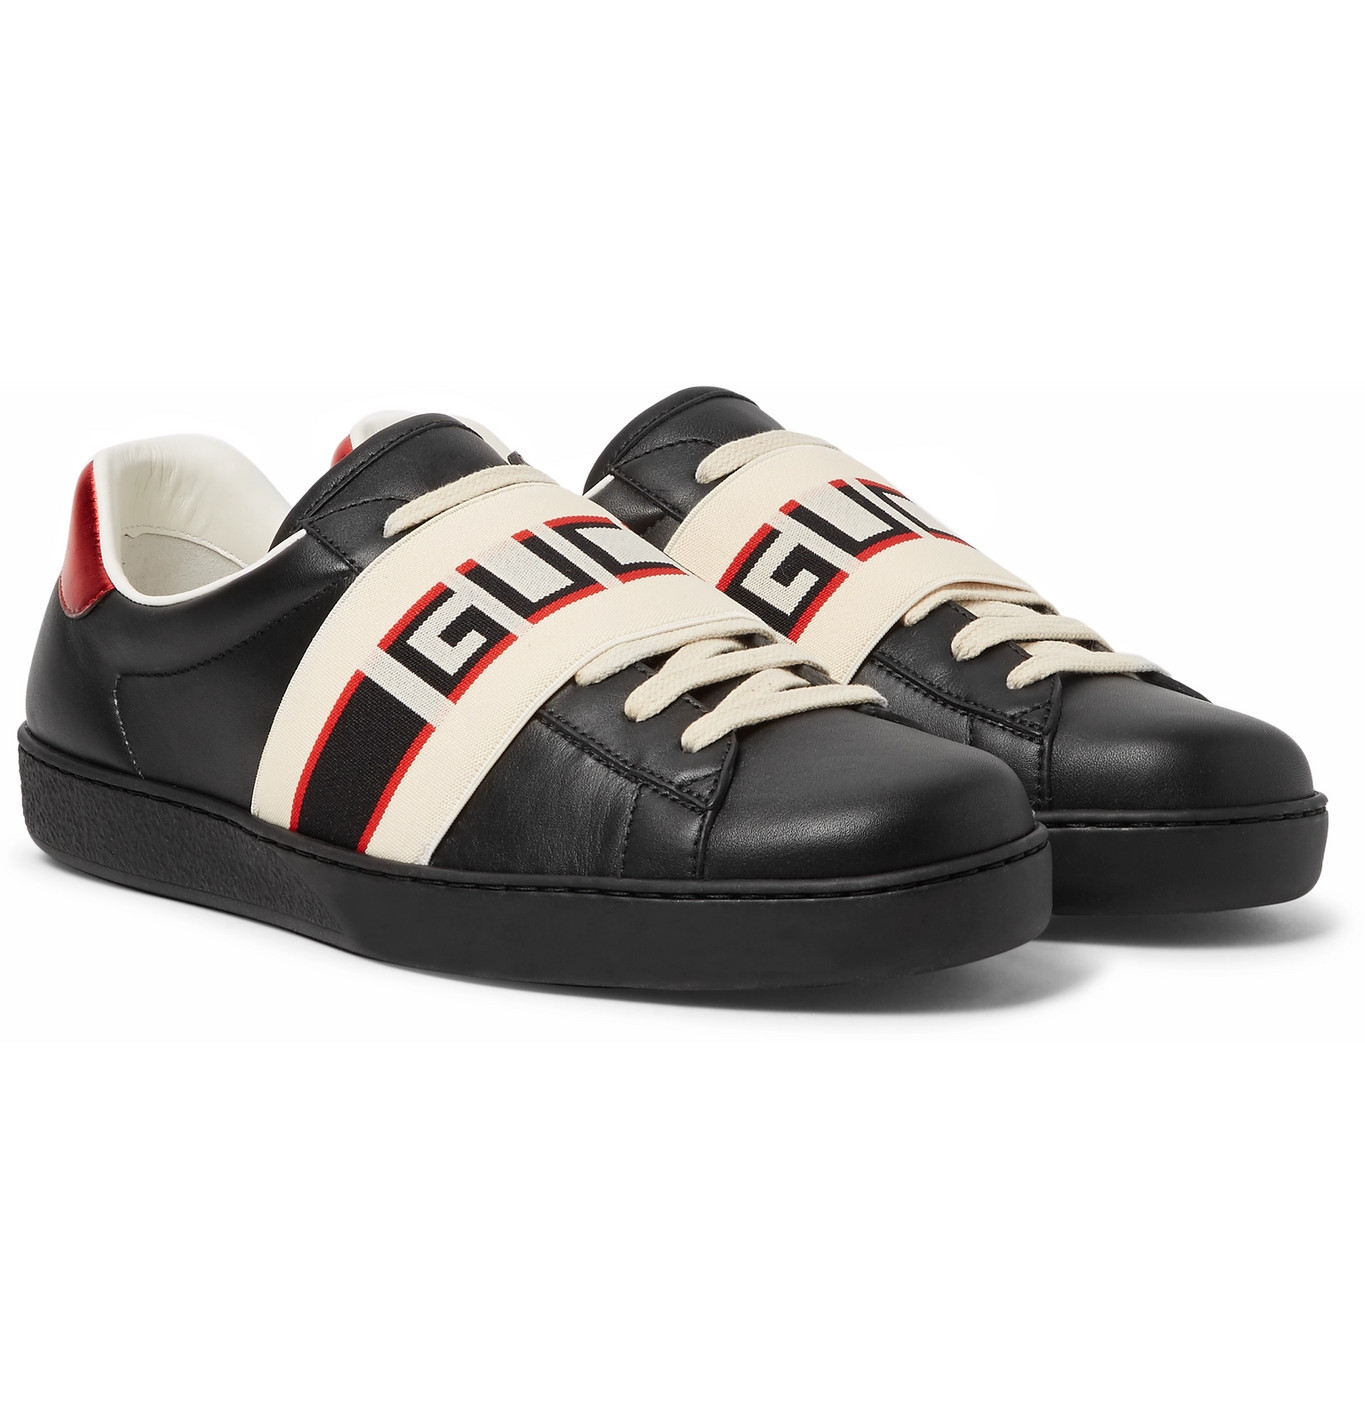 Gucci - Logo-Print Leather Sneakers 